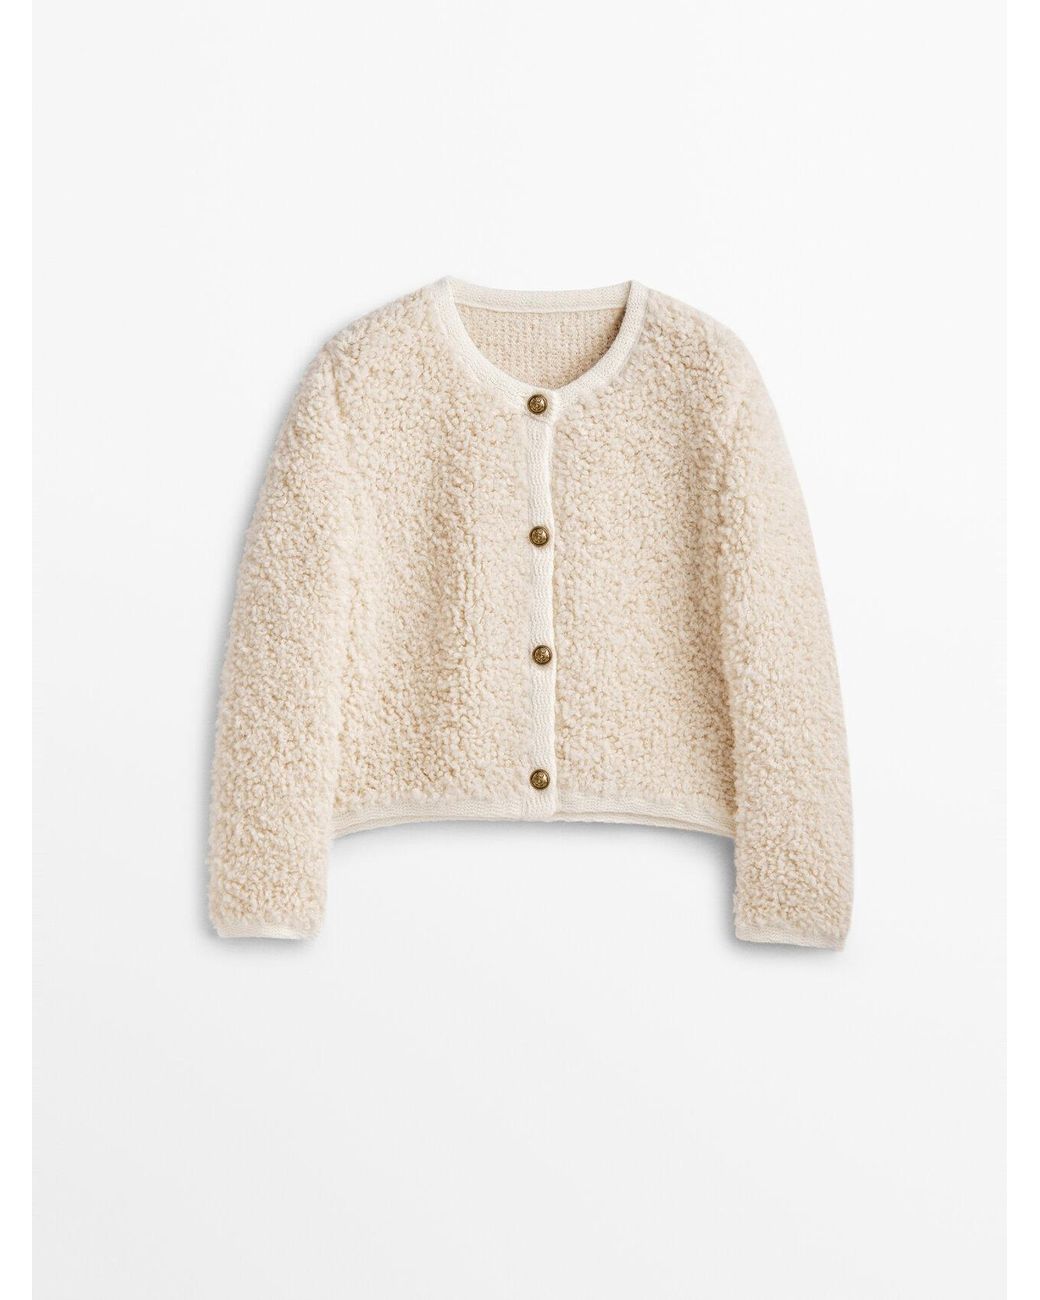 MASSIMO DUTTI Bouclé Knit Cardigan With Buttons in White | Lyst